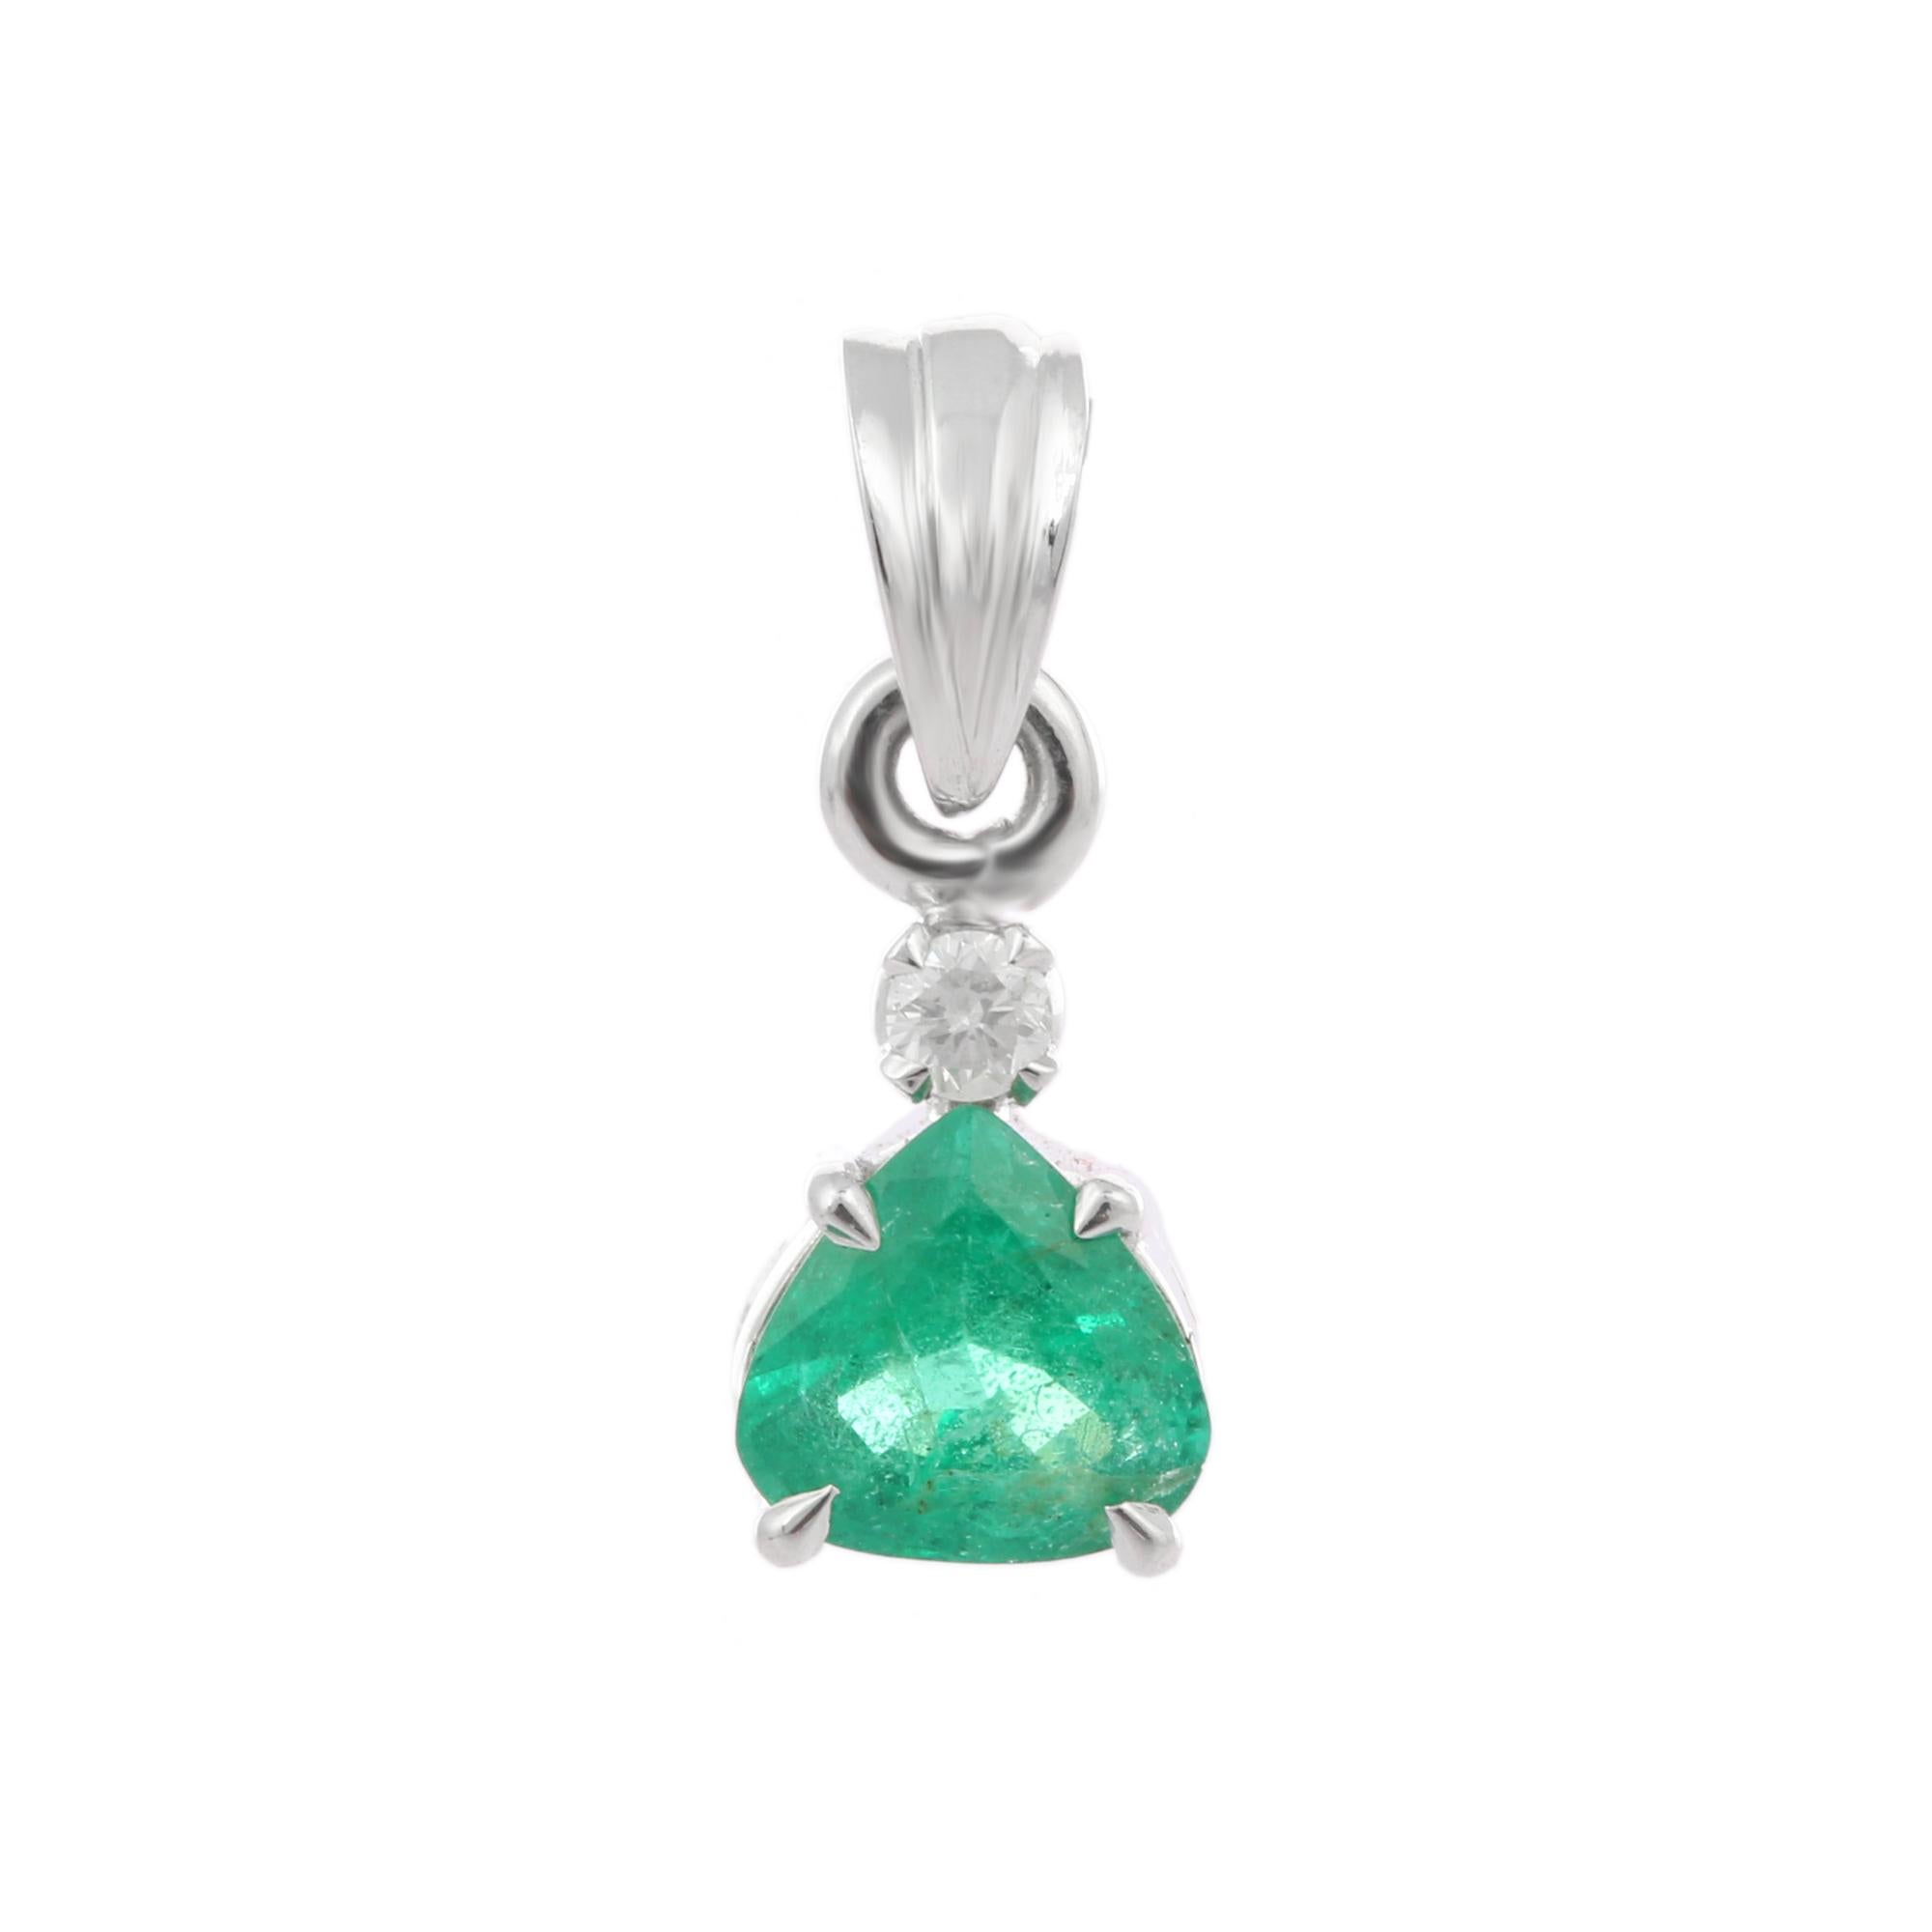 Emerald pendant in 18K Gold. It has a pear cut emerald studded with diamonds that completes your look with a decent touch. Pendants are used to wear or gifted to represent love and promises. It's an attractive jewelry piece that goes with every